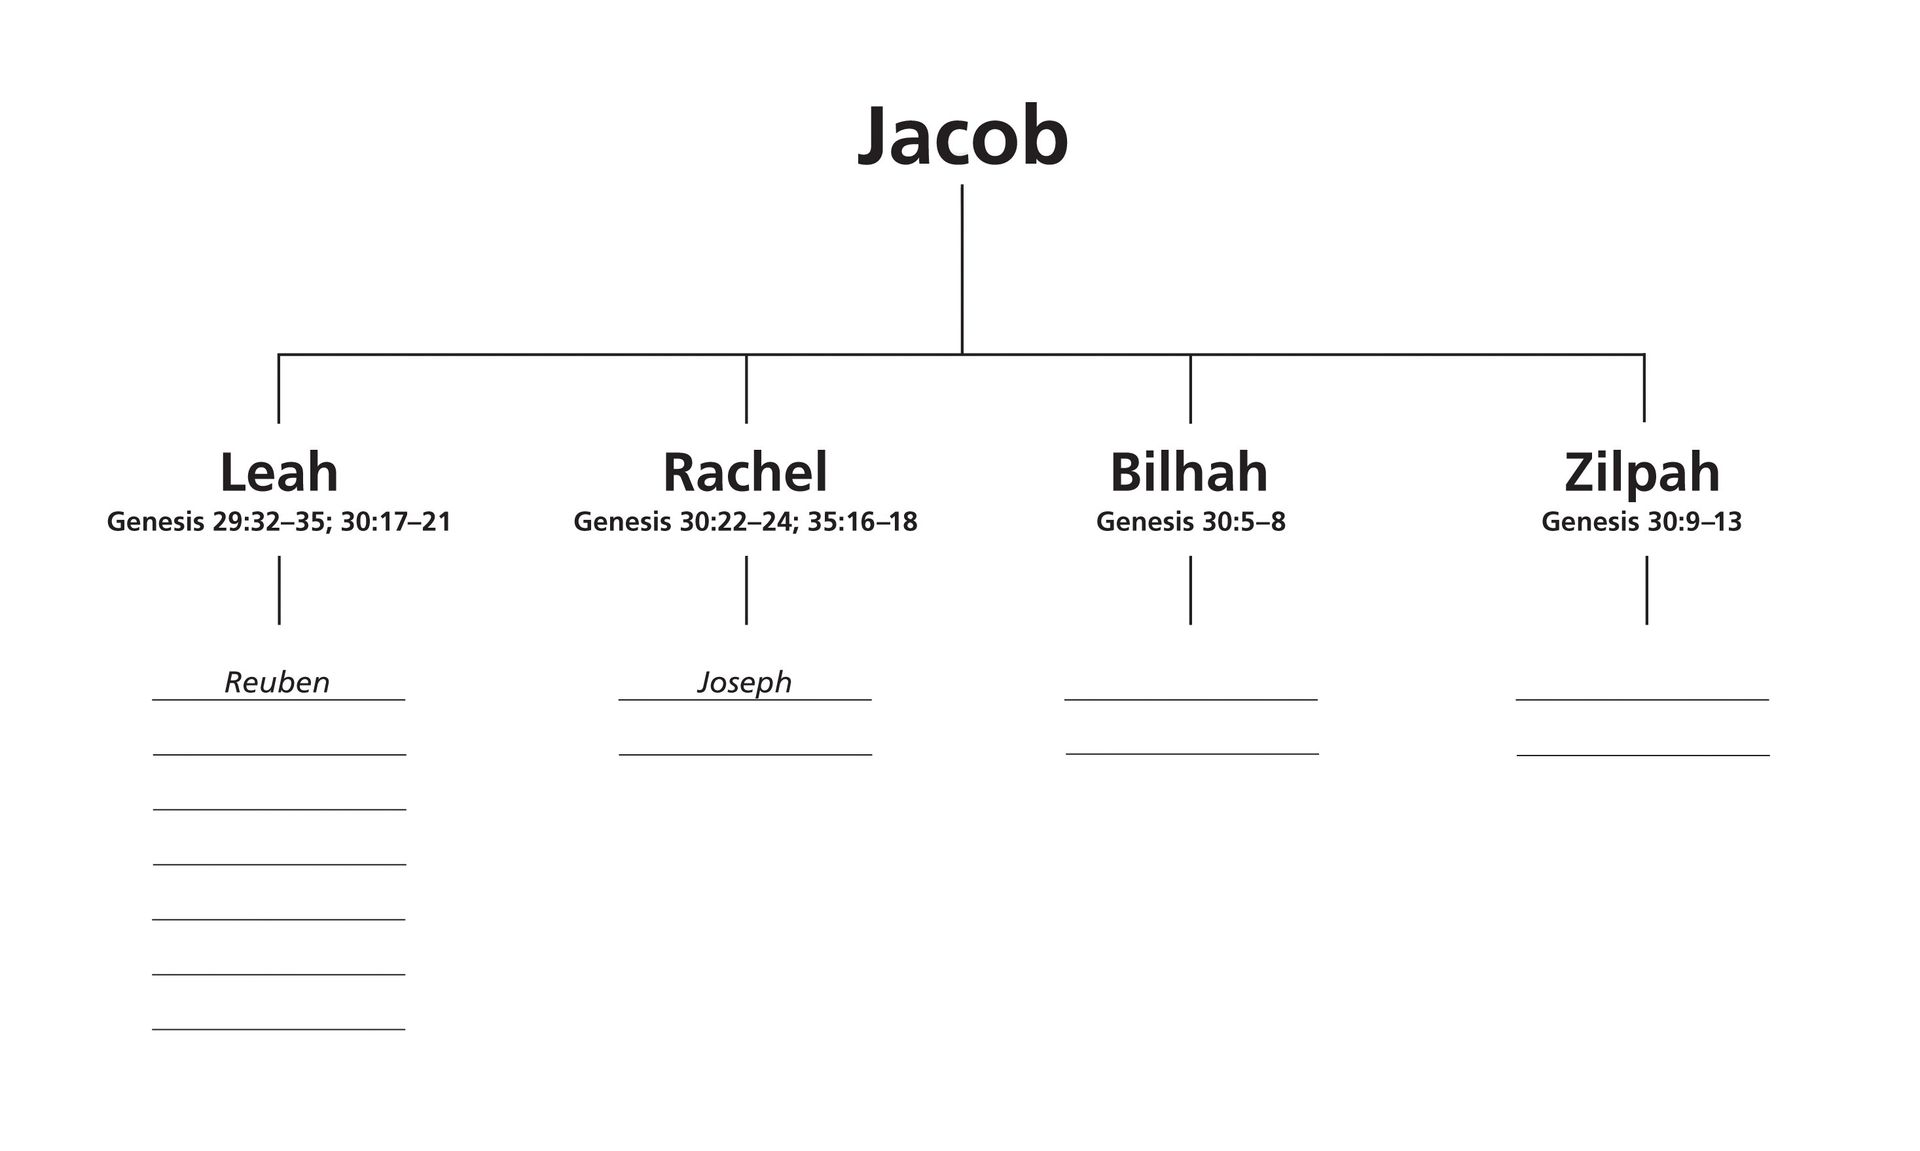 A worksheet that can be filled in with the names of Jacob’s children.